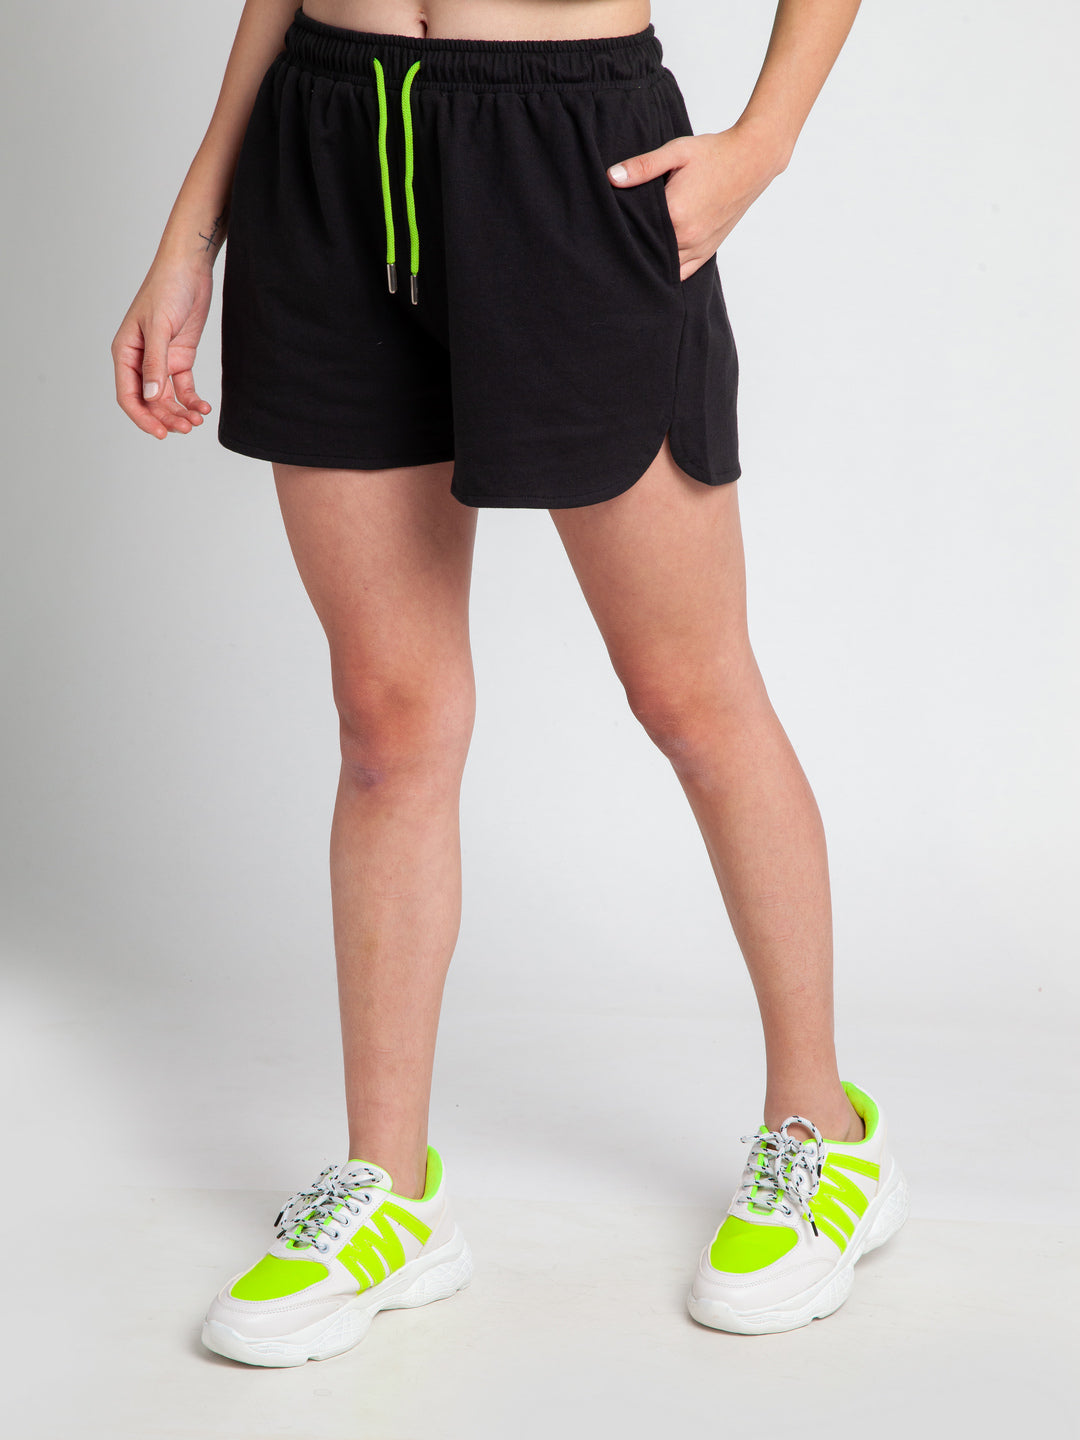 Black Solid Shorts For Women